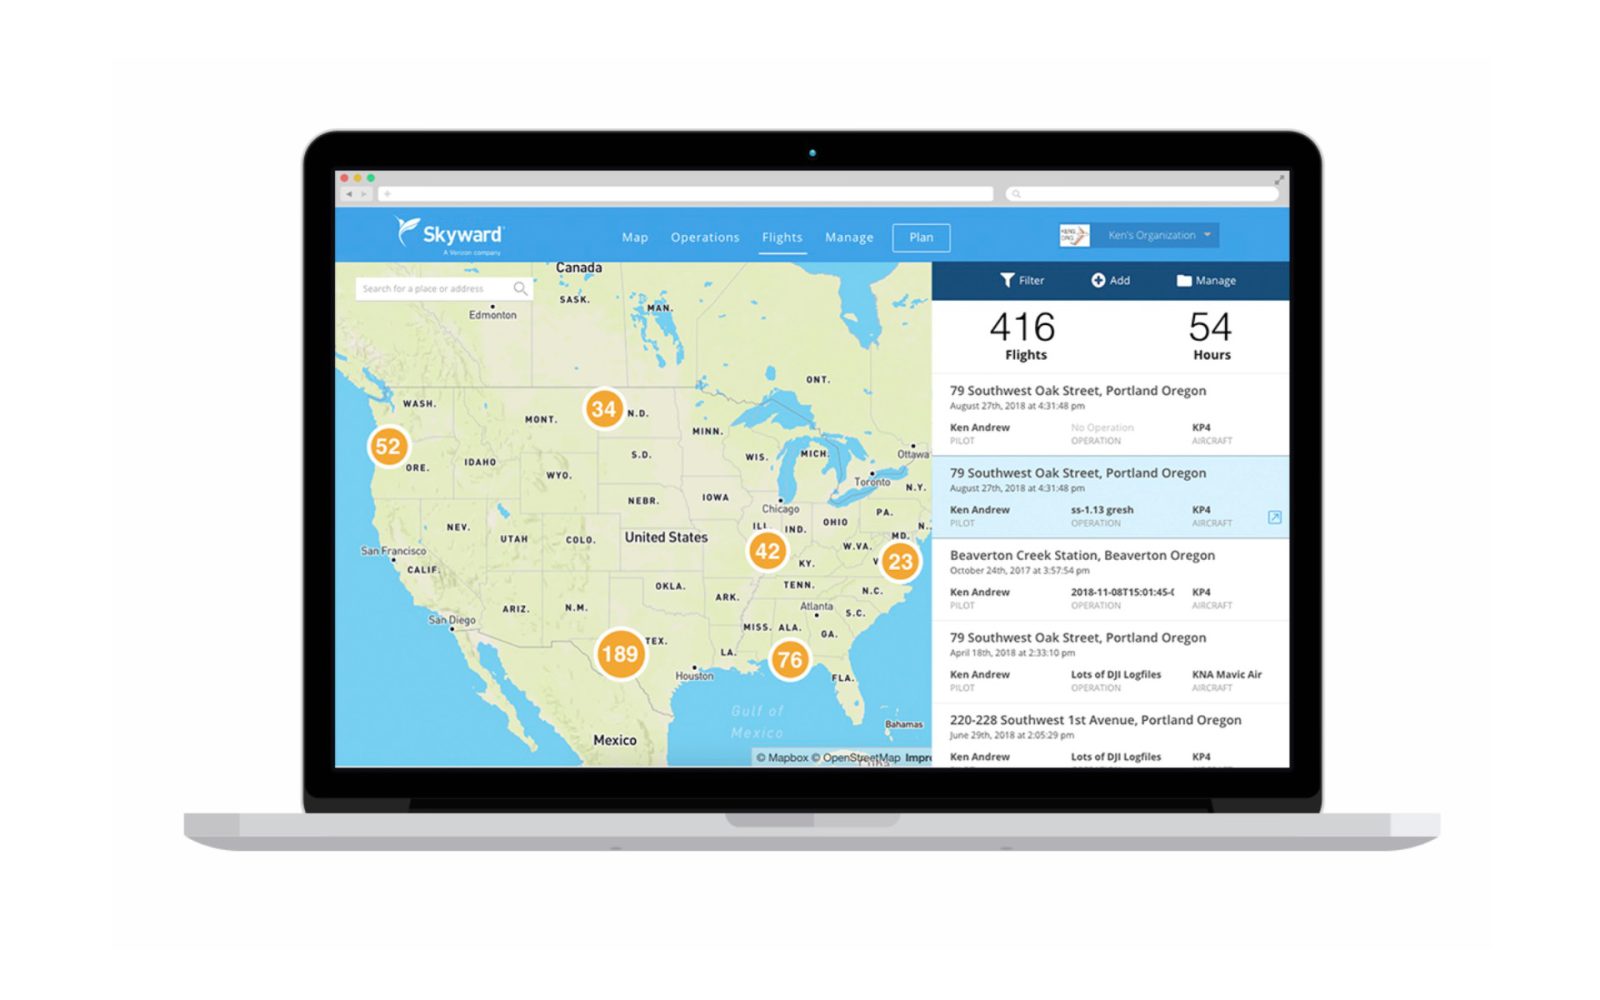 Skyward introduces a brand new feature, called Flight Insights